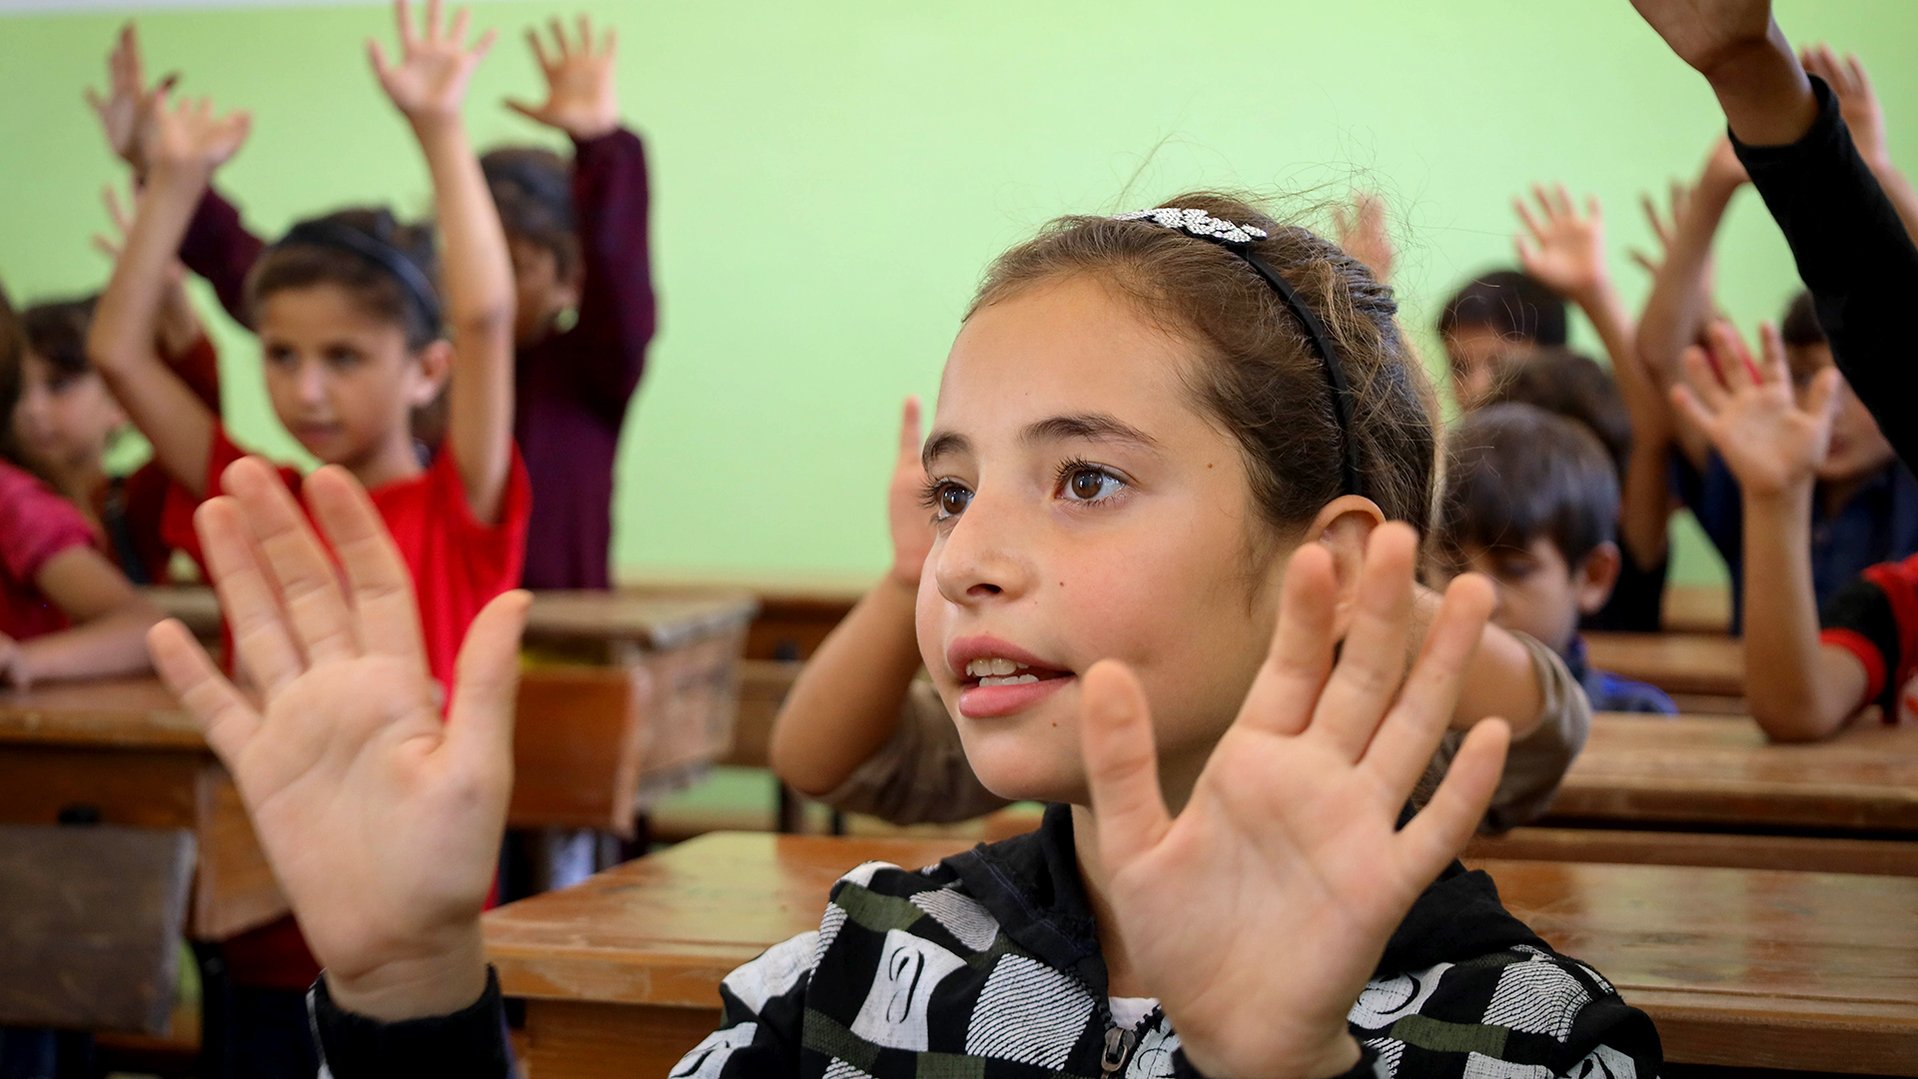 War Child is providing catch up education for Syrian children like Bashaer who are affected by the earthquakes